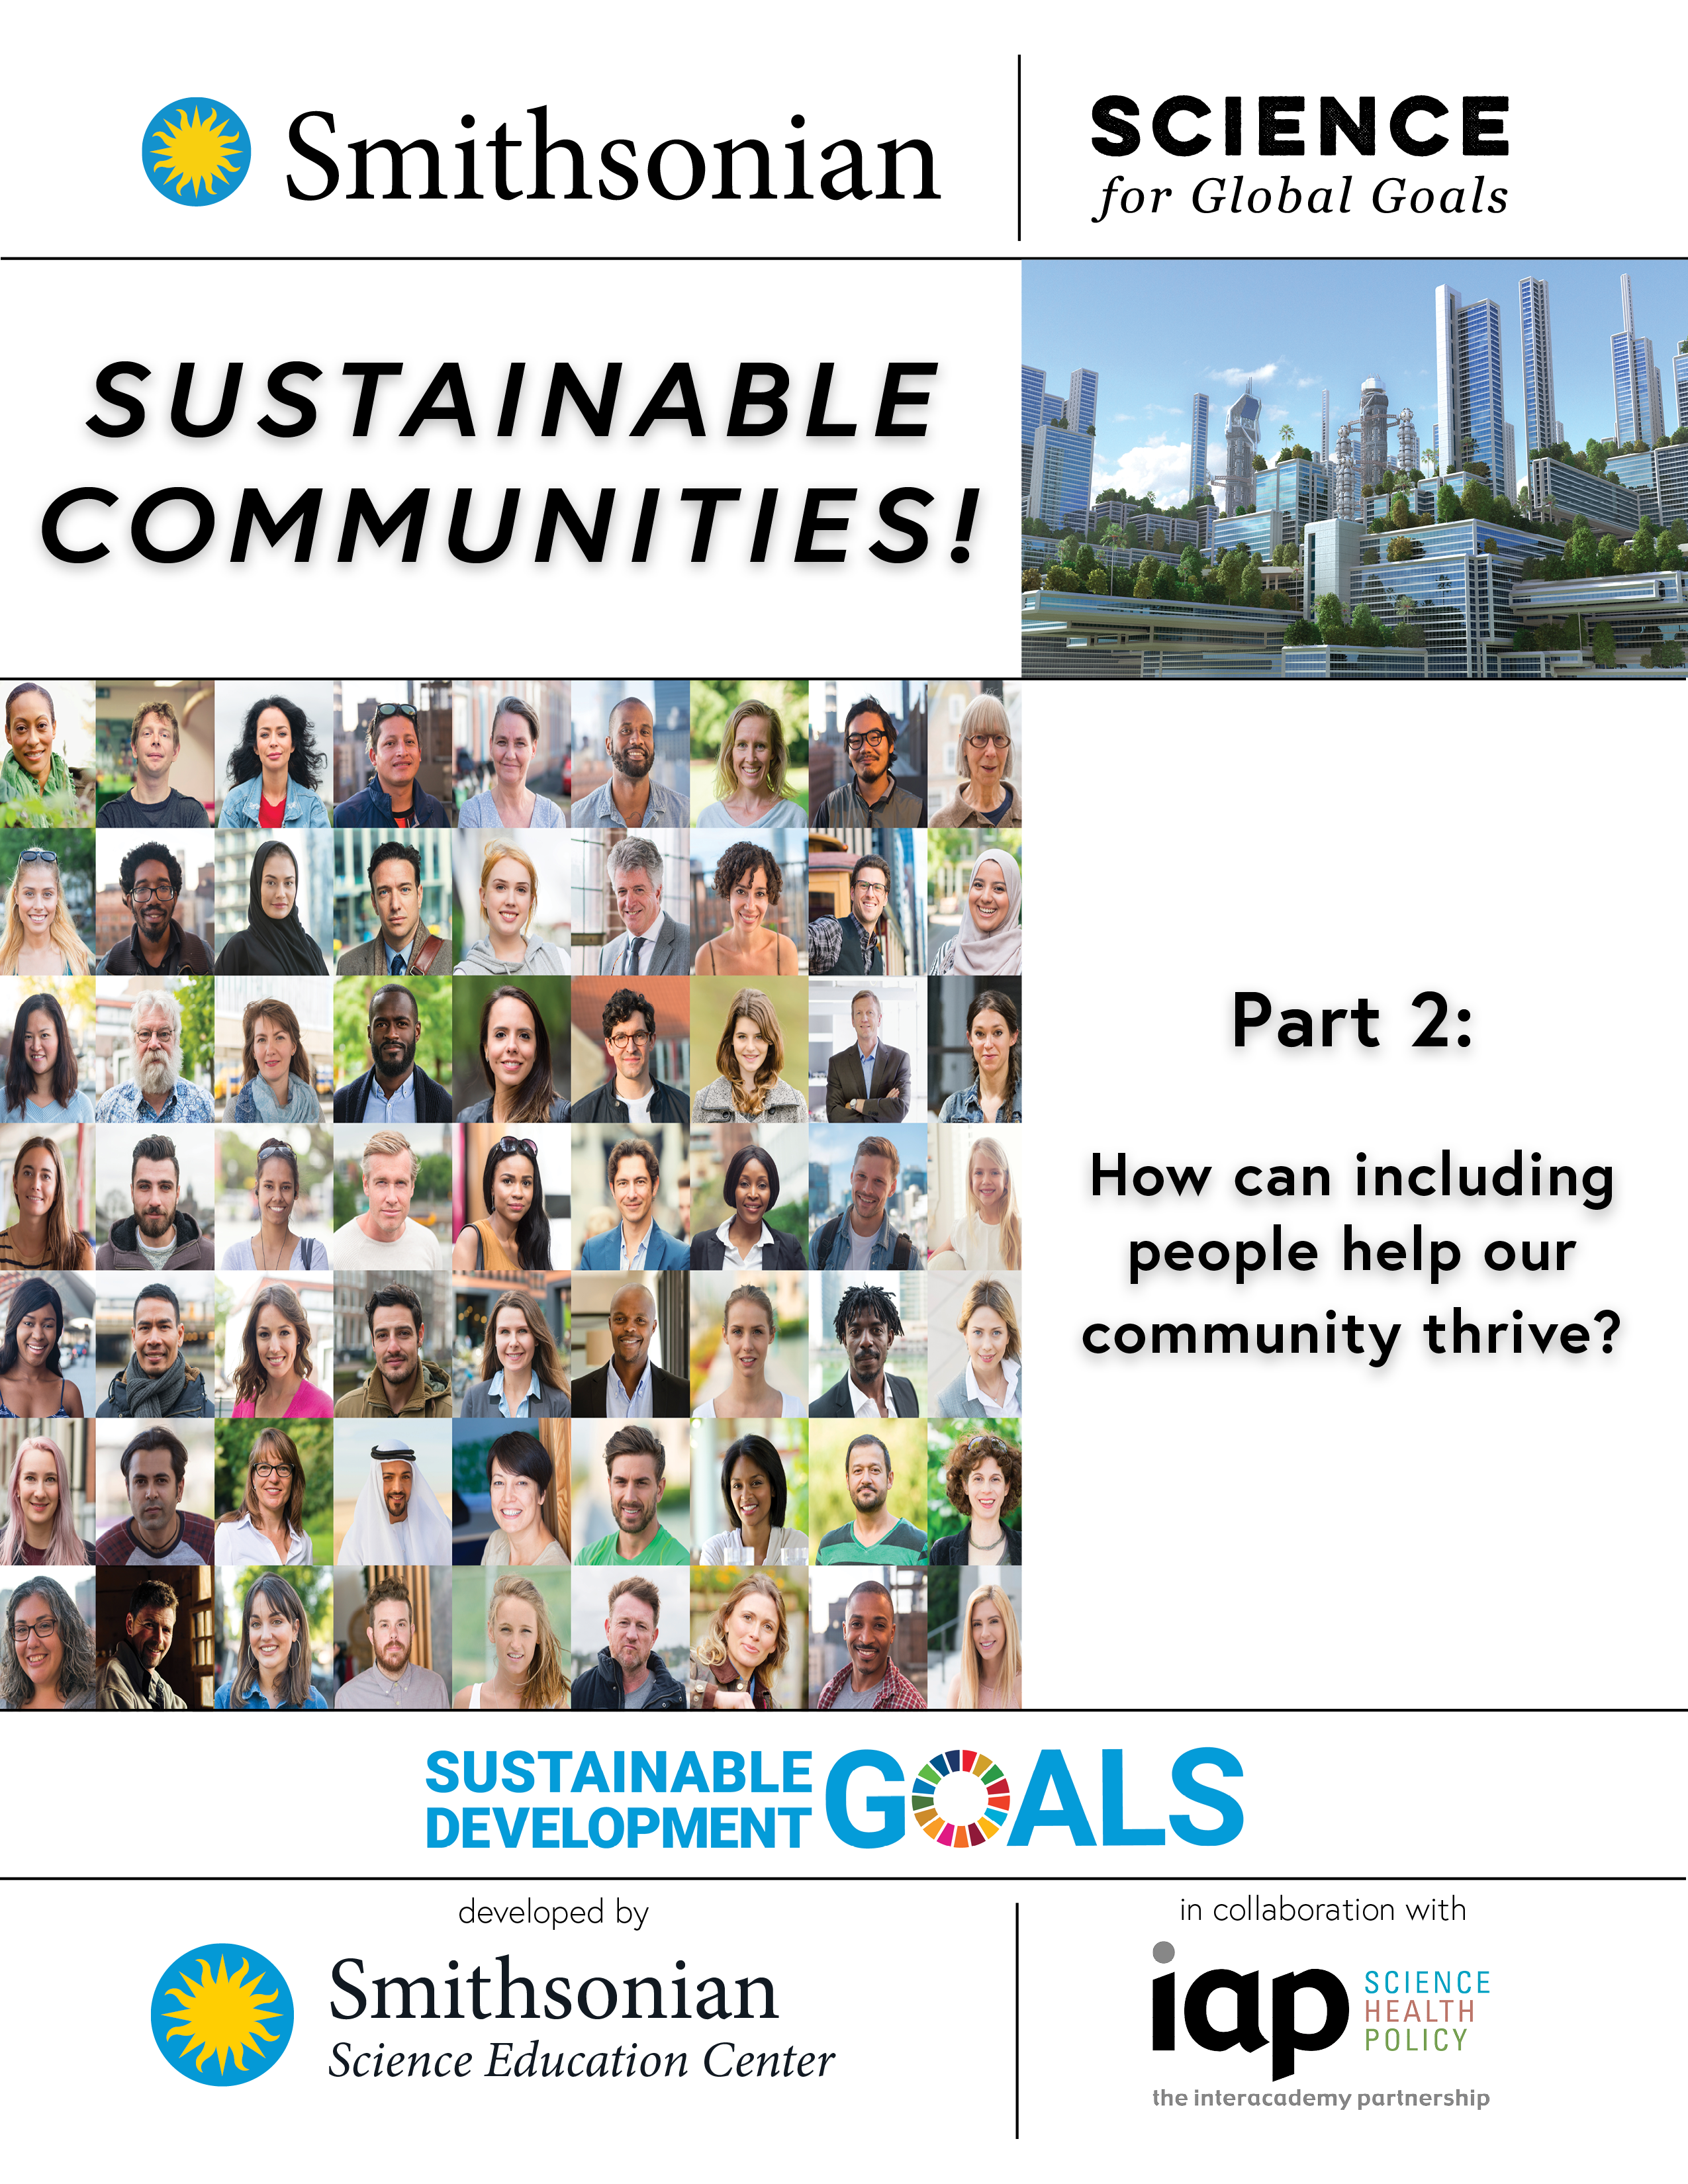 Part 2 for Sustainable Communities